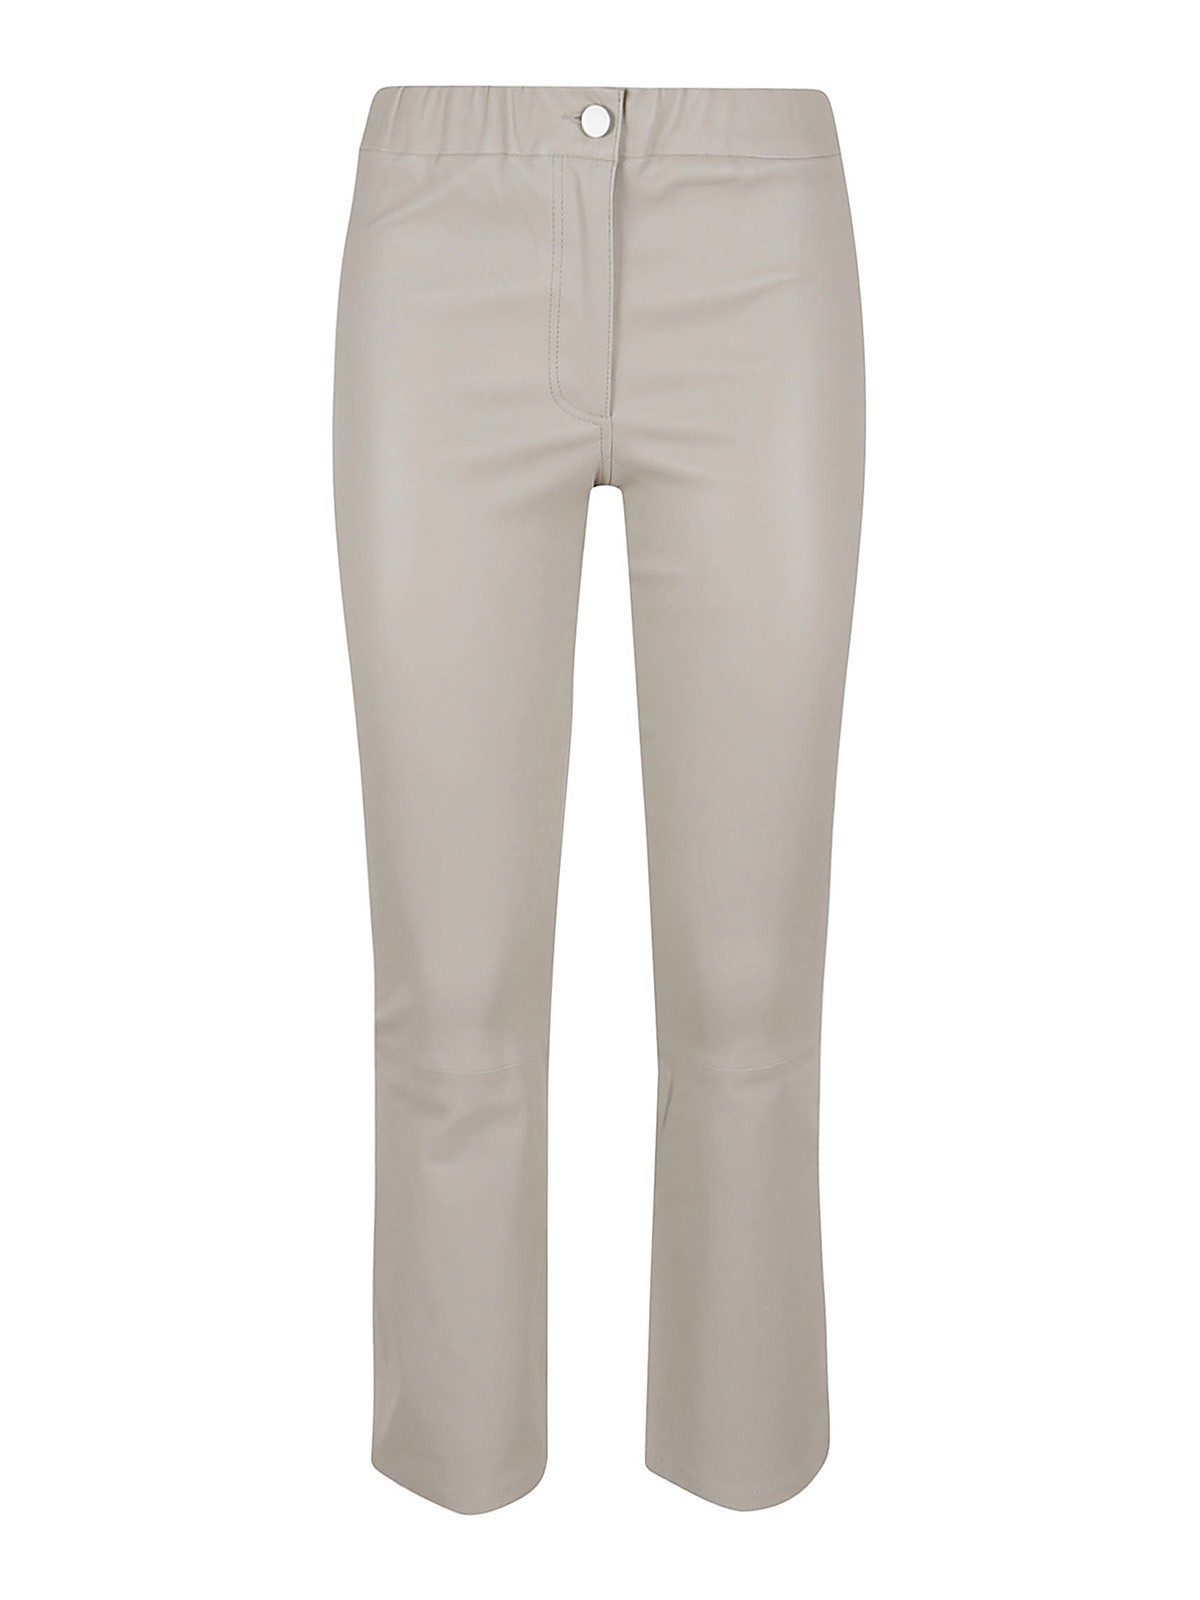 Leather trousers Arma - Lively cropped pants - 001L22600502ALMOND